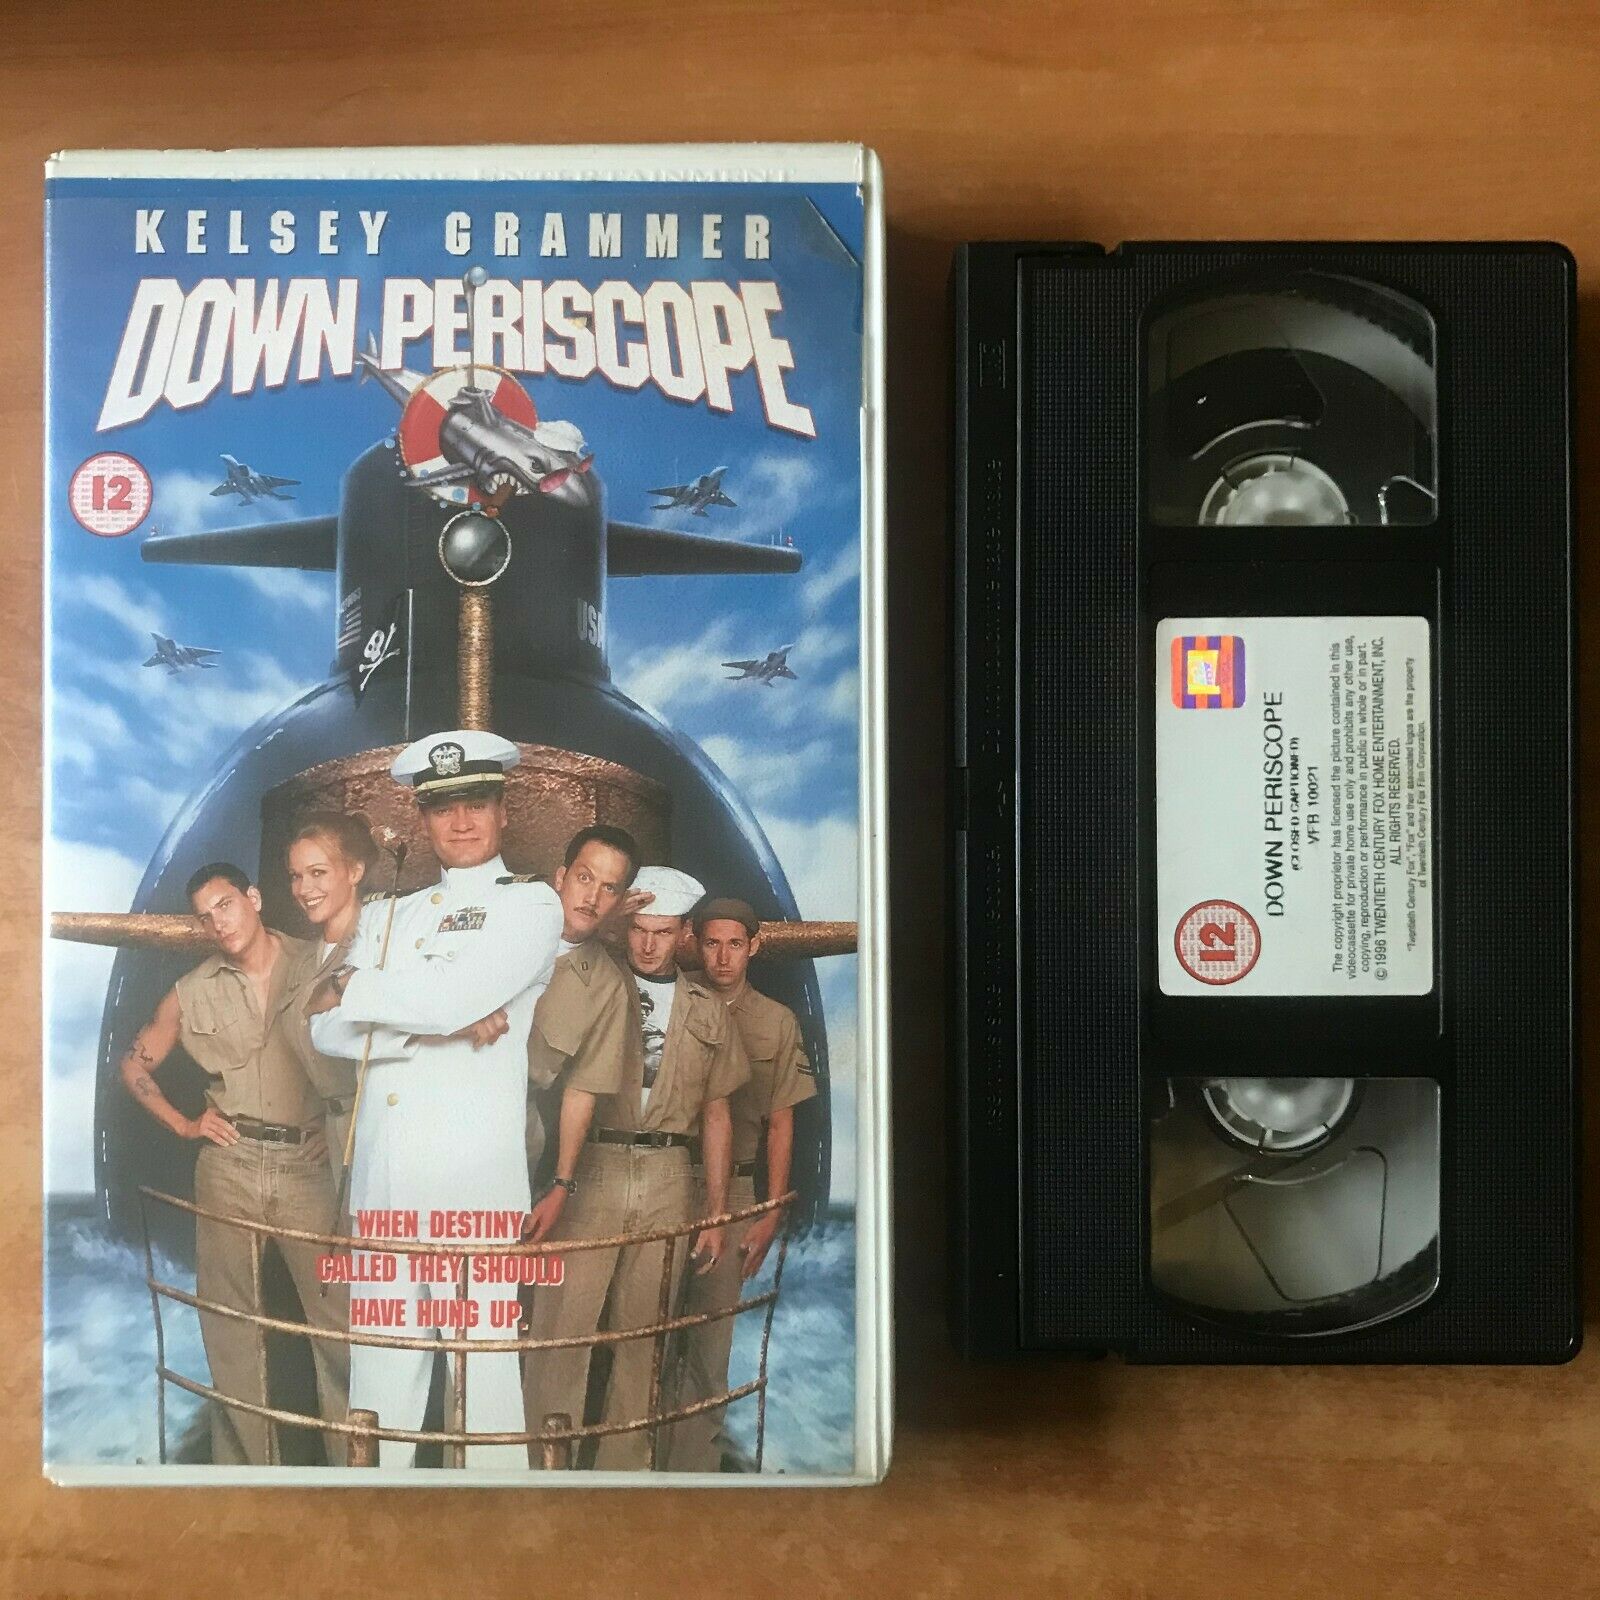 Down Periscope (1996): Spoof Comedy - Large Box - Down Periscope - Pal VHS-